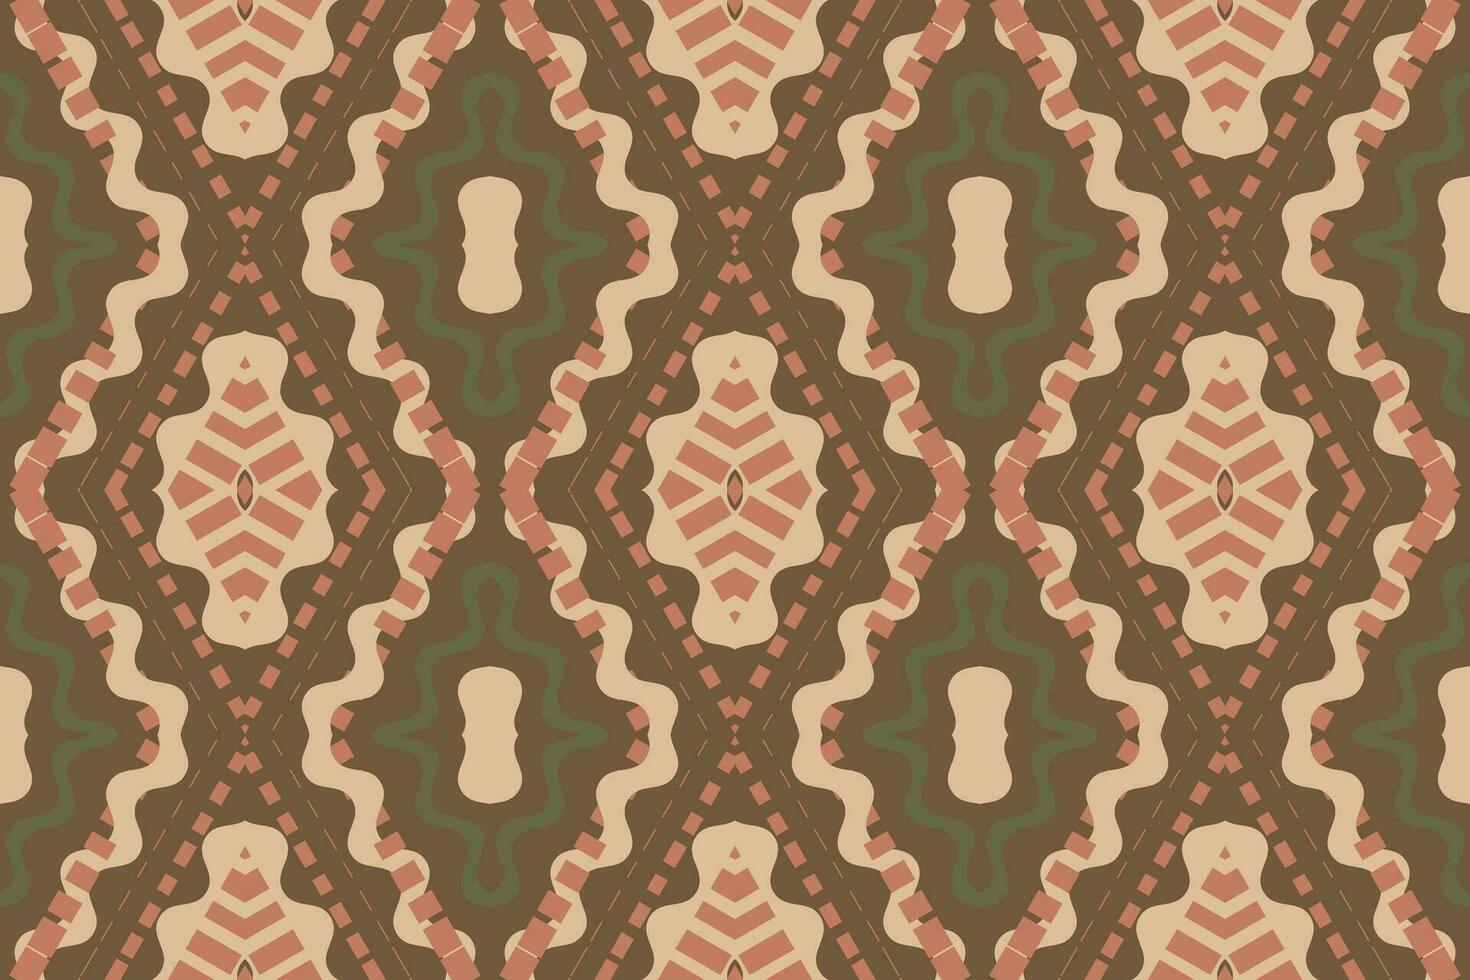 Ikat Floral Paisley Embroidery Background. Ikat Prints Geometric Ethnic Oriental Pattern Traditional. Ikat Aztec Style Abstract Design for Print Texture,fabric,saree,sari,carpet. vector